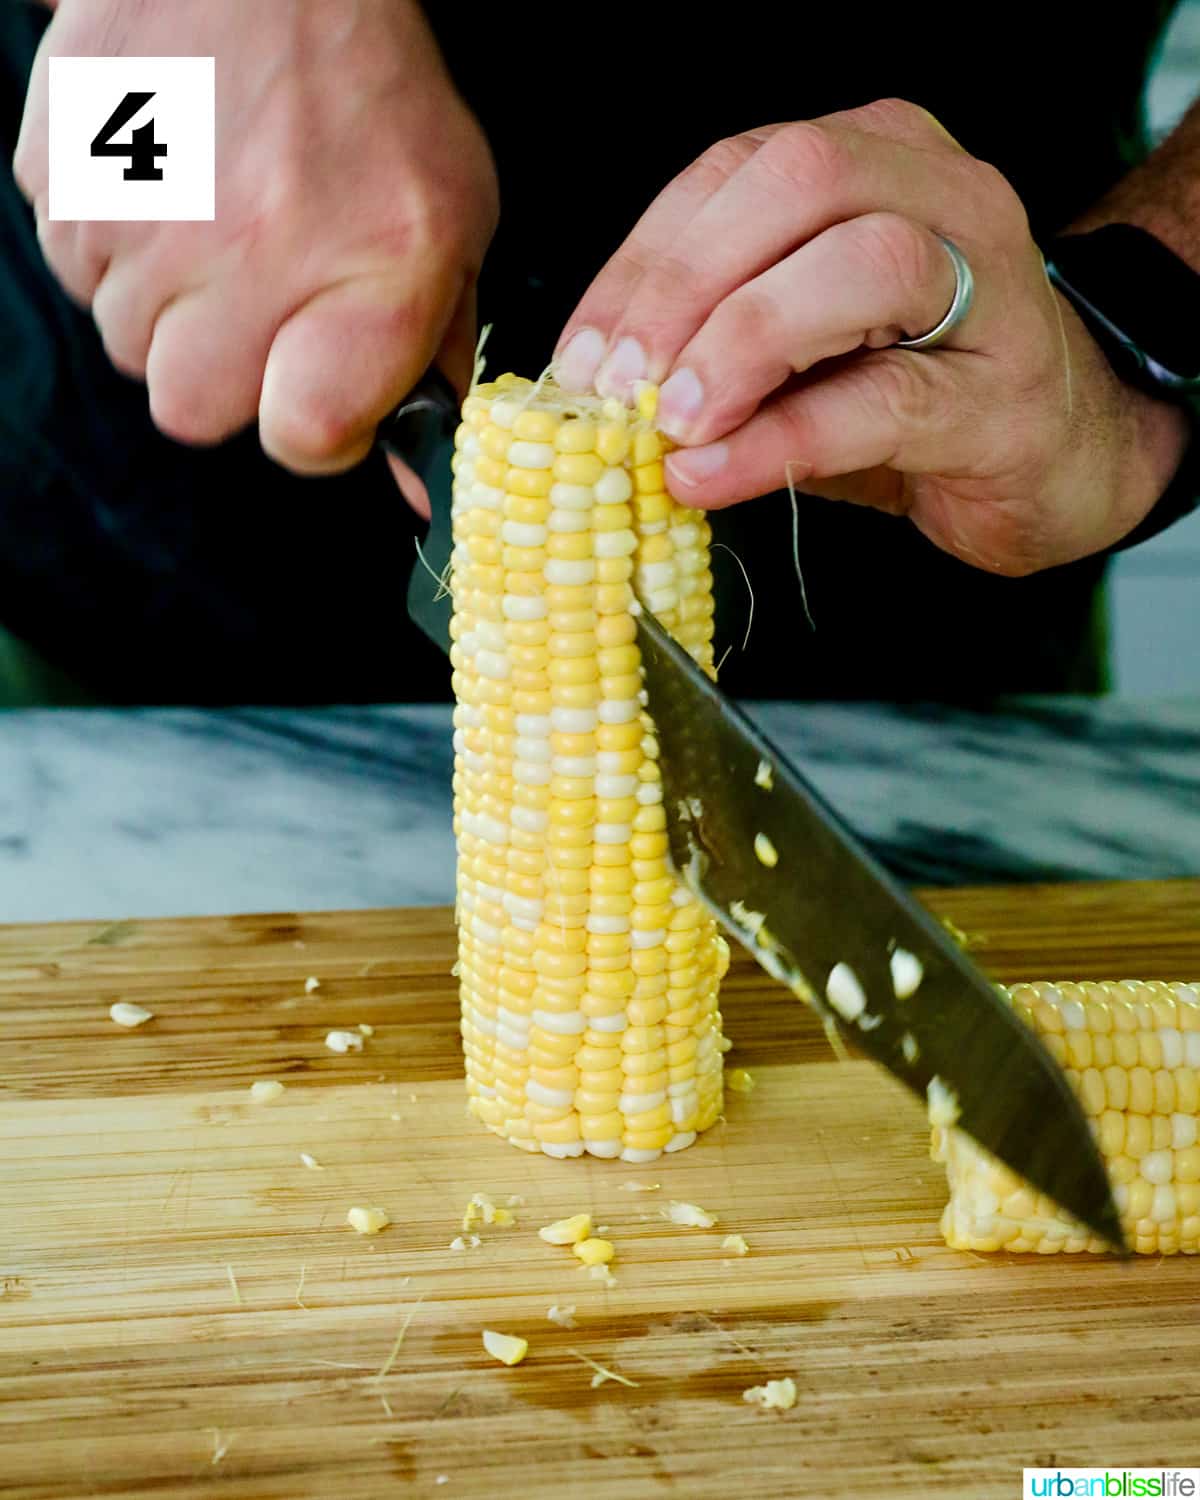 hands using a knife to slice down a corn on the cob on a cutting board.